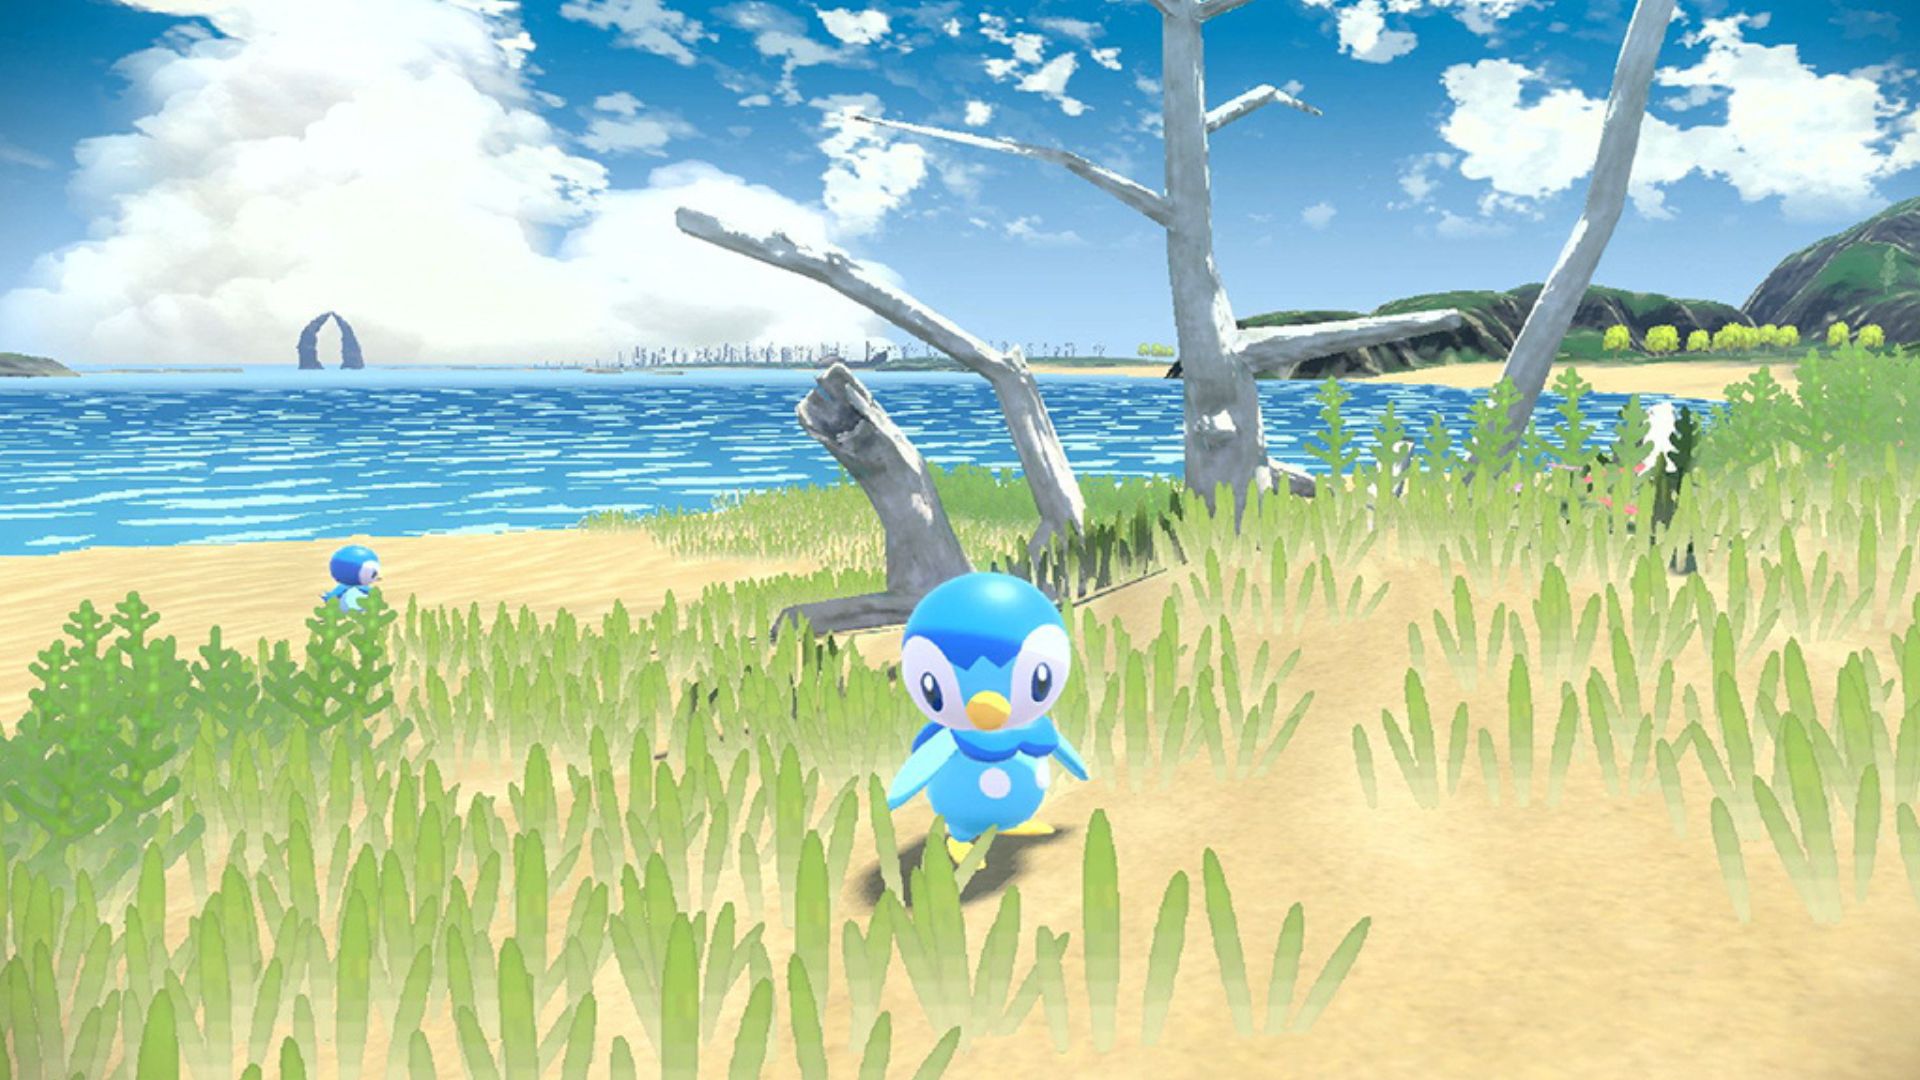 Best monster games: Pokémon Legends: Arceus. Image shows Piplup, a small bird, standing in some grass near the ocean. 